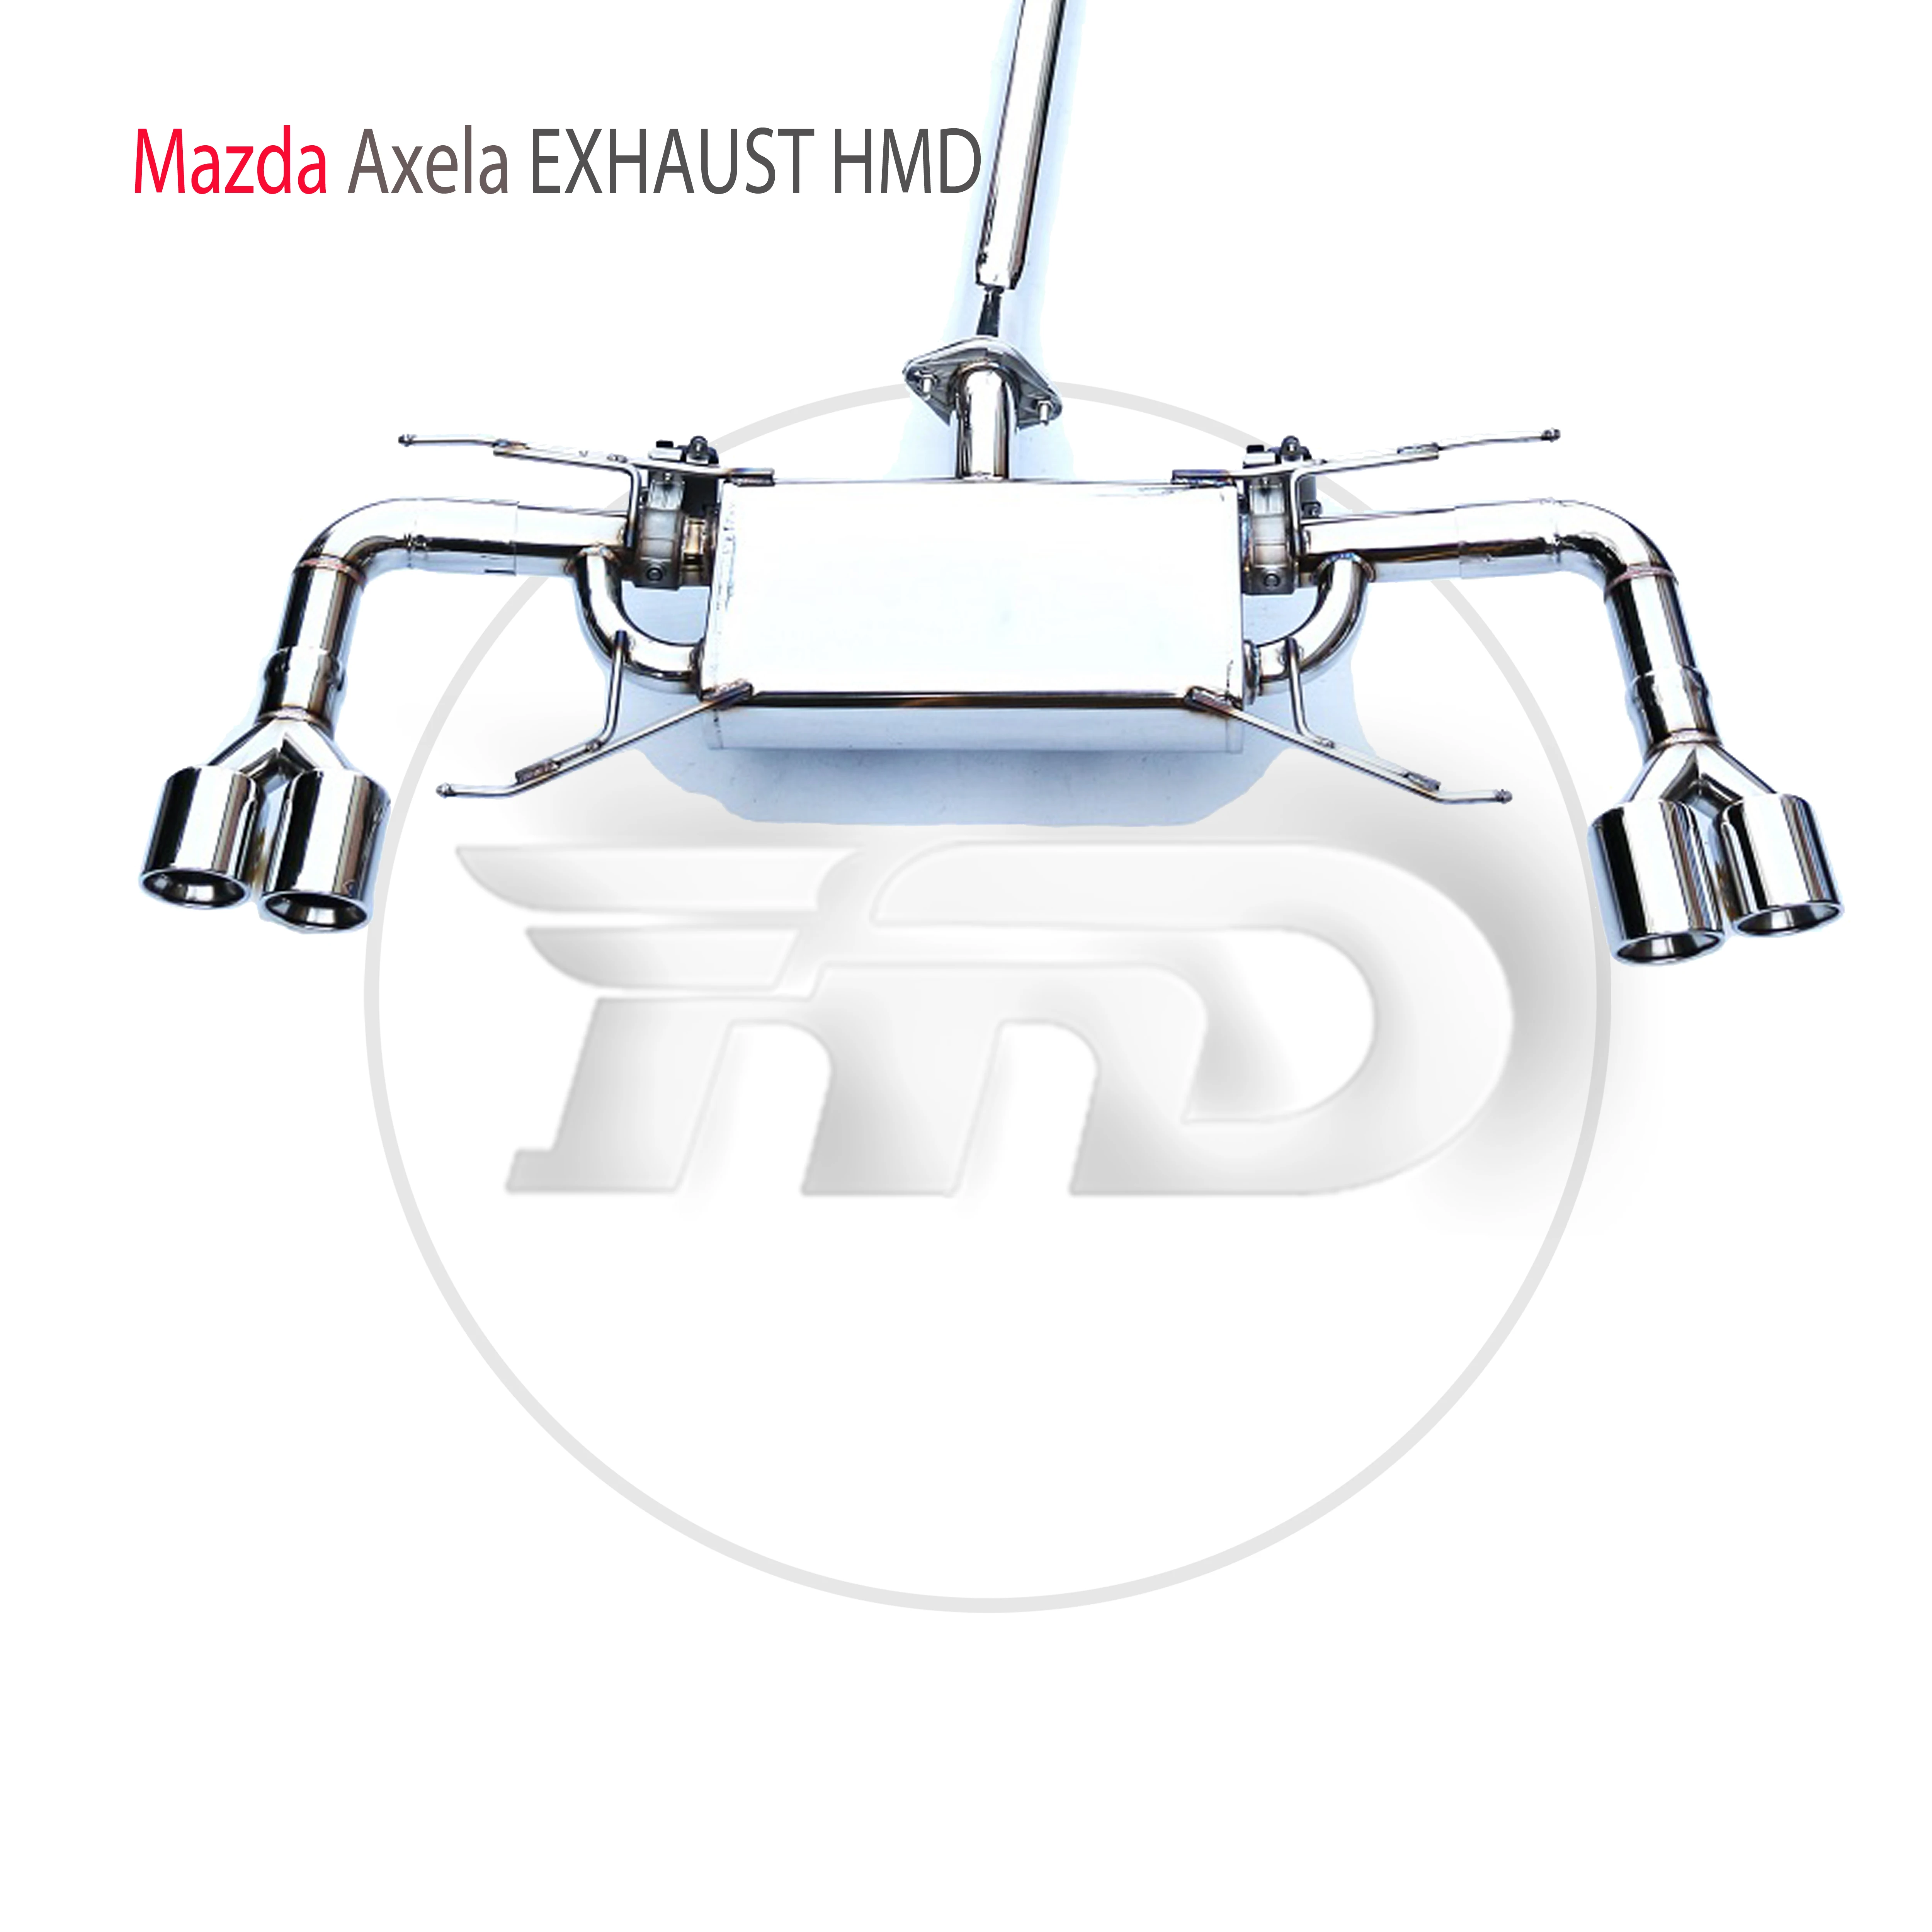 HMD Stainless Steel Exhaust System Performance Catback is Suitable for Mazda 3 Axela Car Valve Muffler